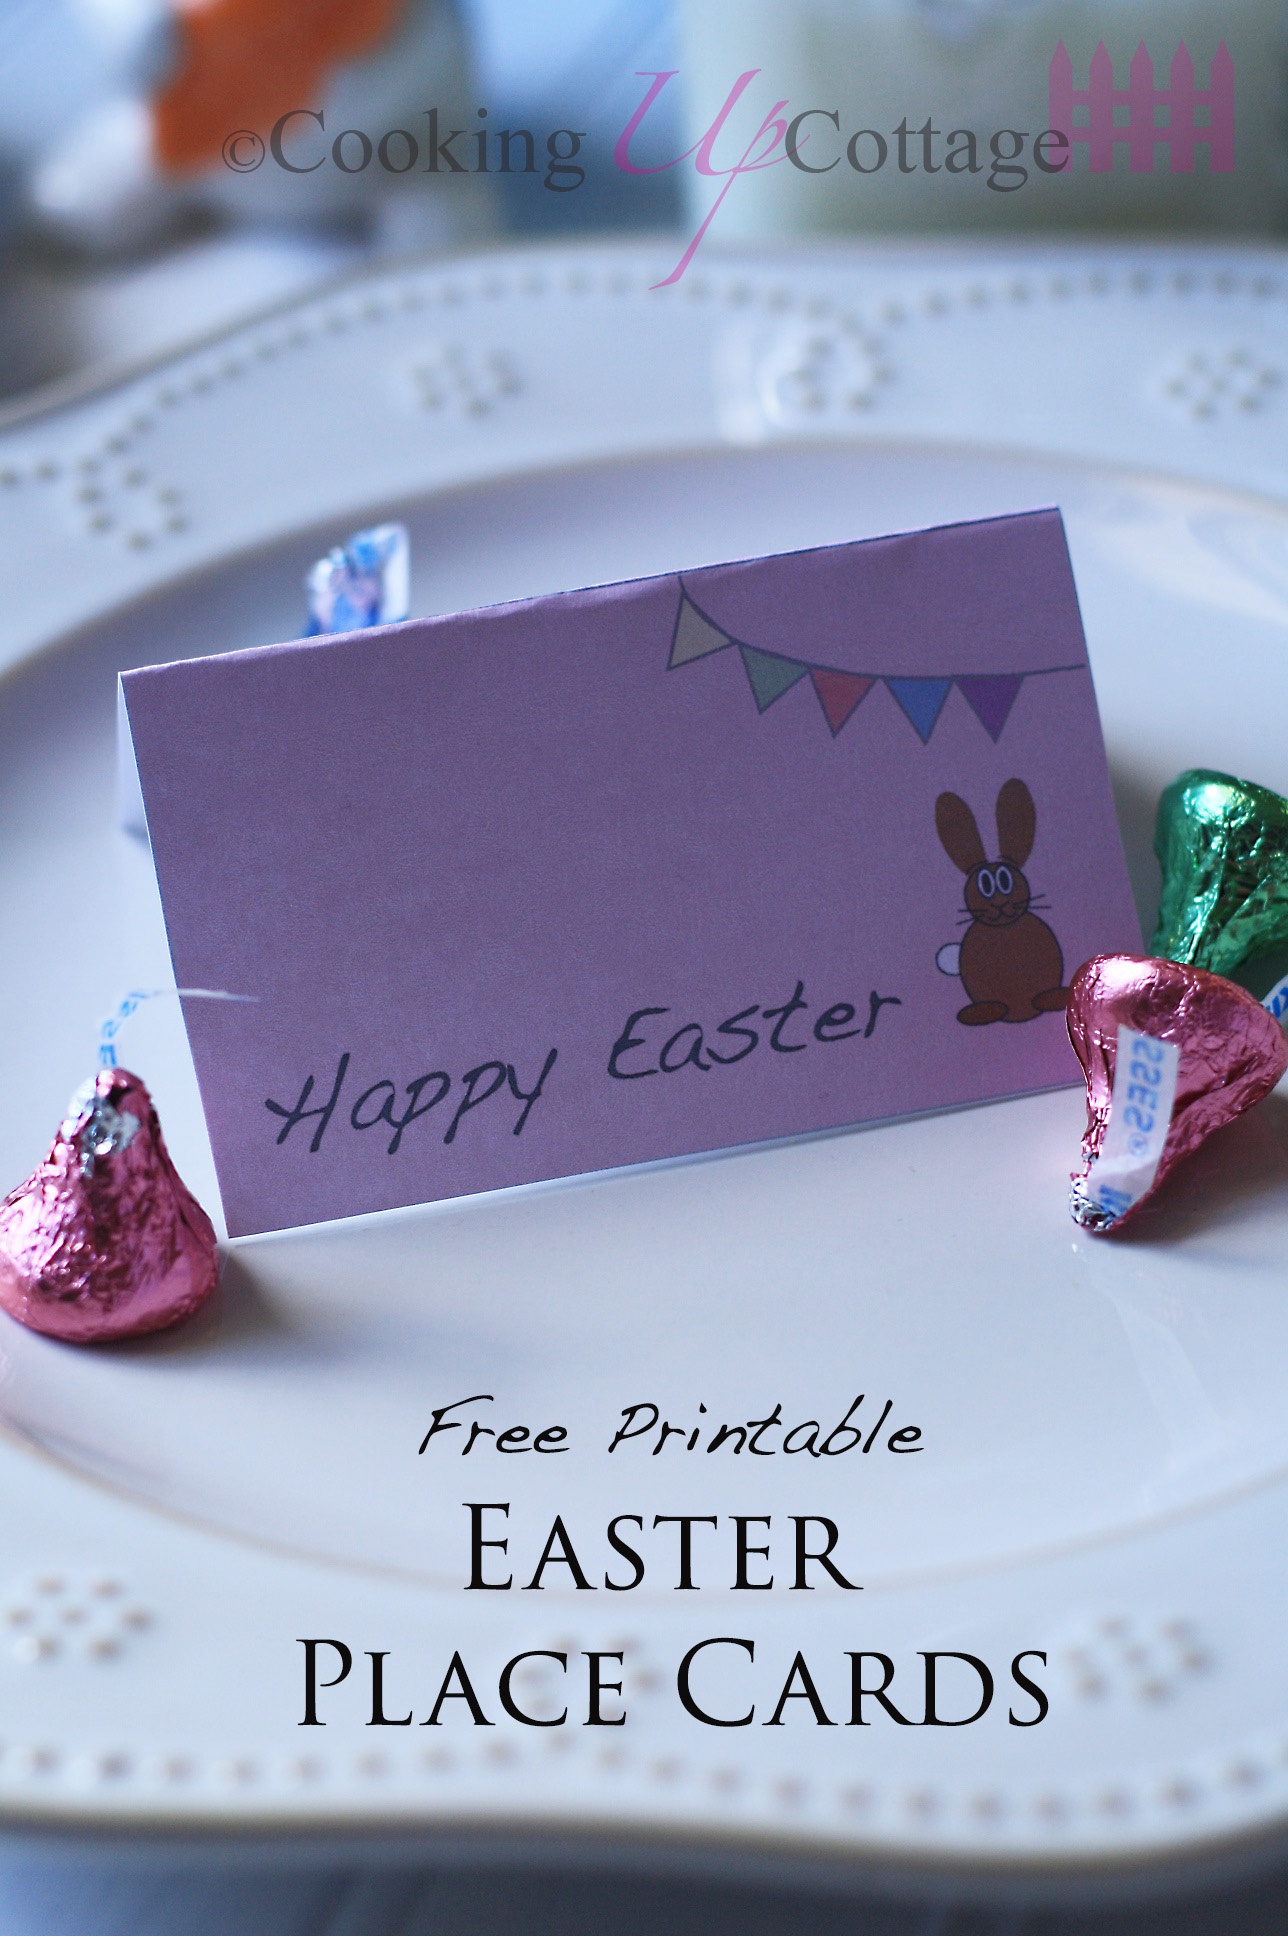 Free Printable Easter Place Cards – Cooking Up Cottage - Free Easter Place Cards Printable